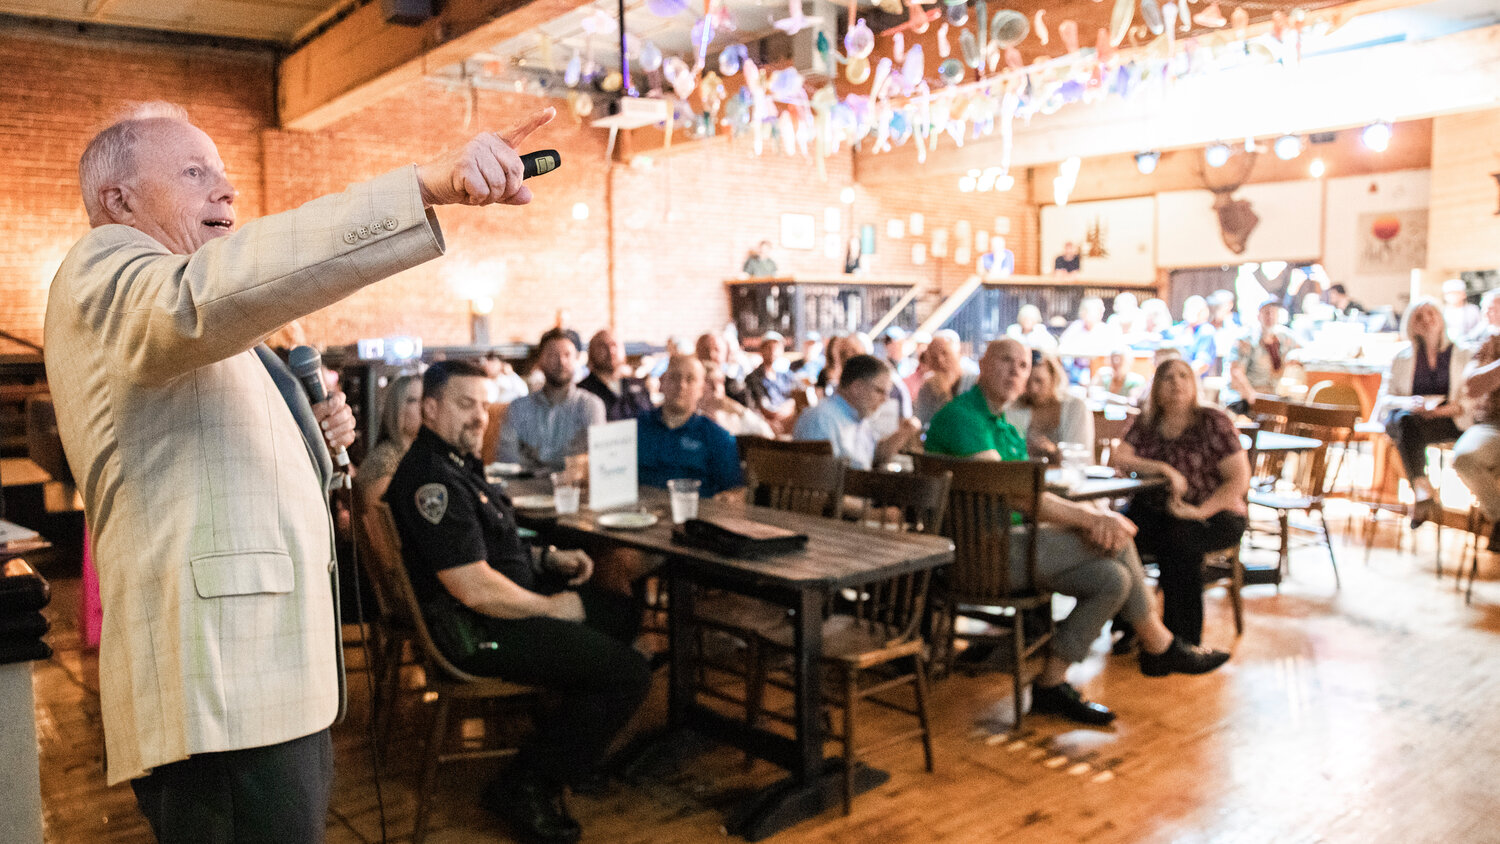 Dr. Bill Conerly points to a presentation while giving an economic forecast for Lewis County during an event hosted by the Economic Alliance of Lewis County at The Juice Box in Centralia on Wednesday, May 17.